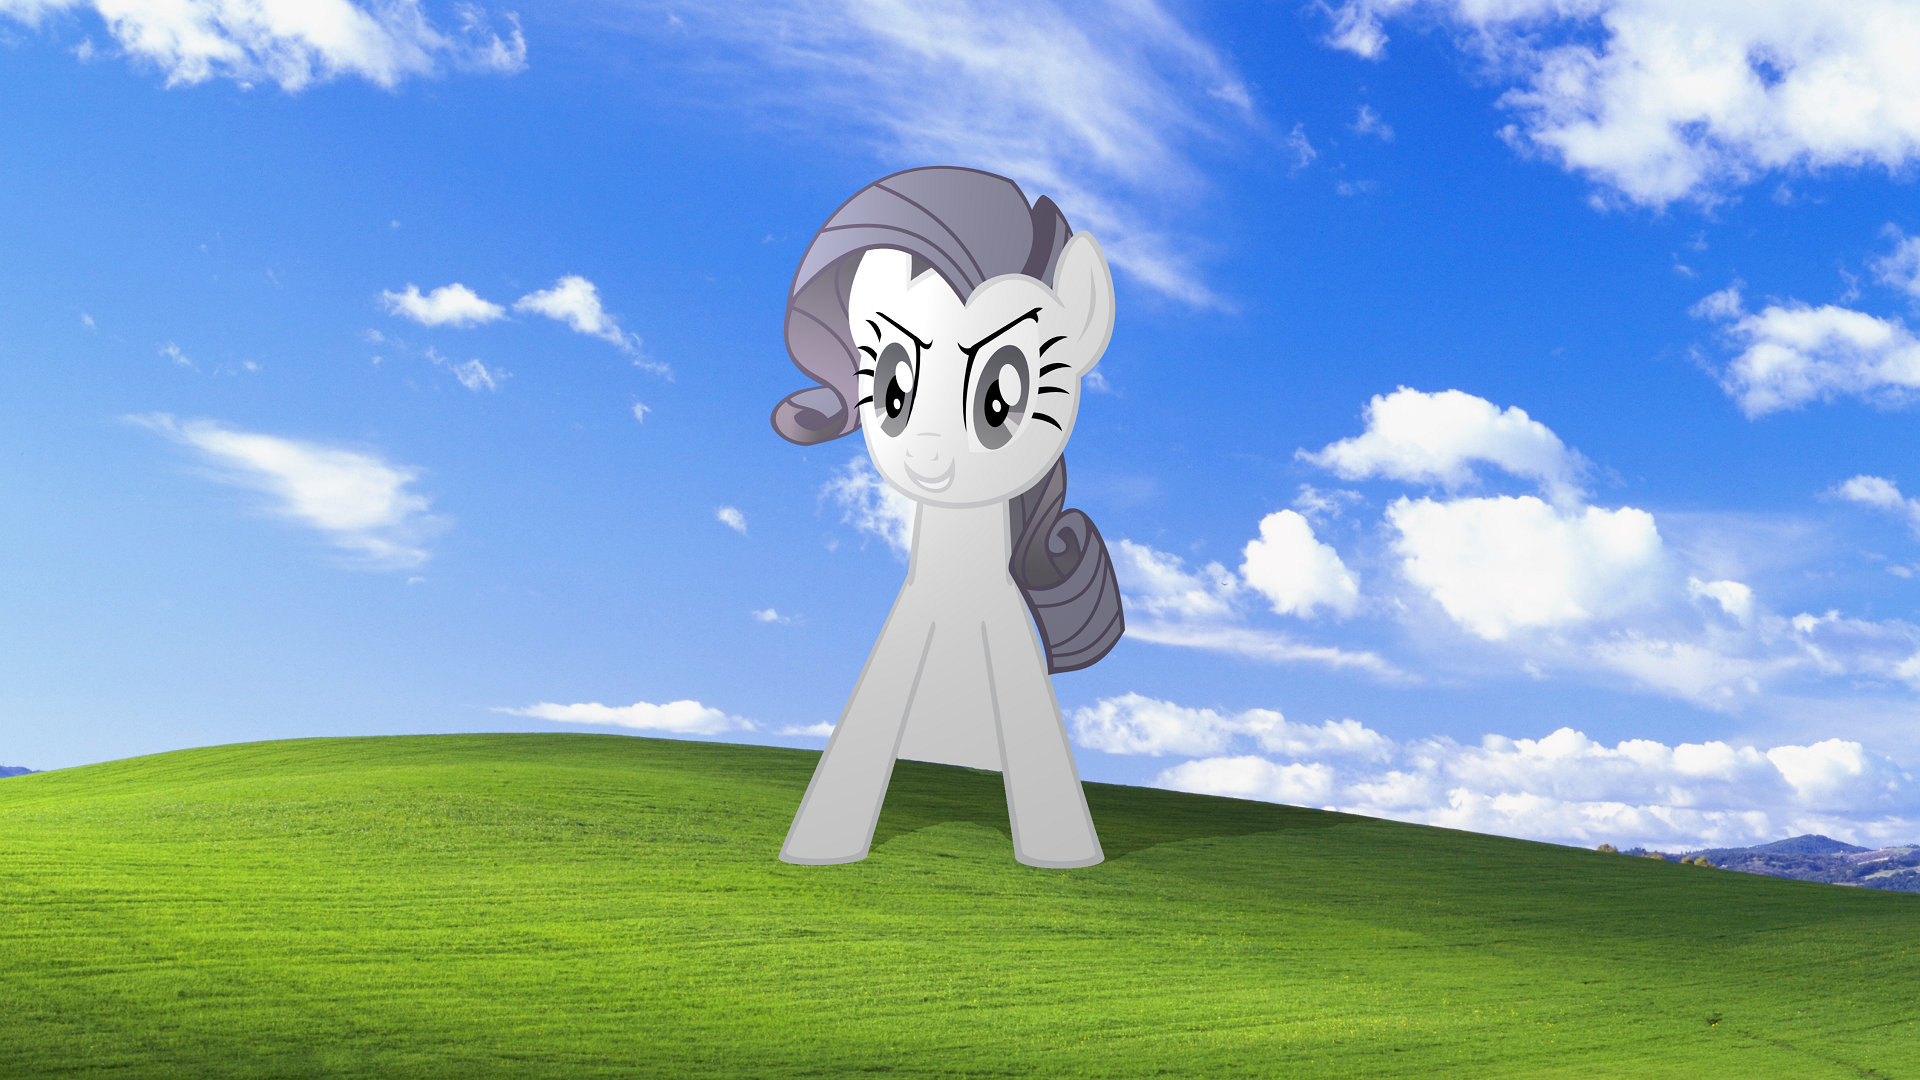 Rarity XP Desktop by Clueless313 and The-Smiling-Pony